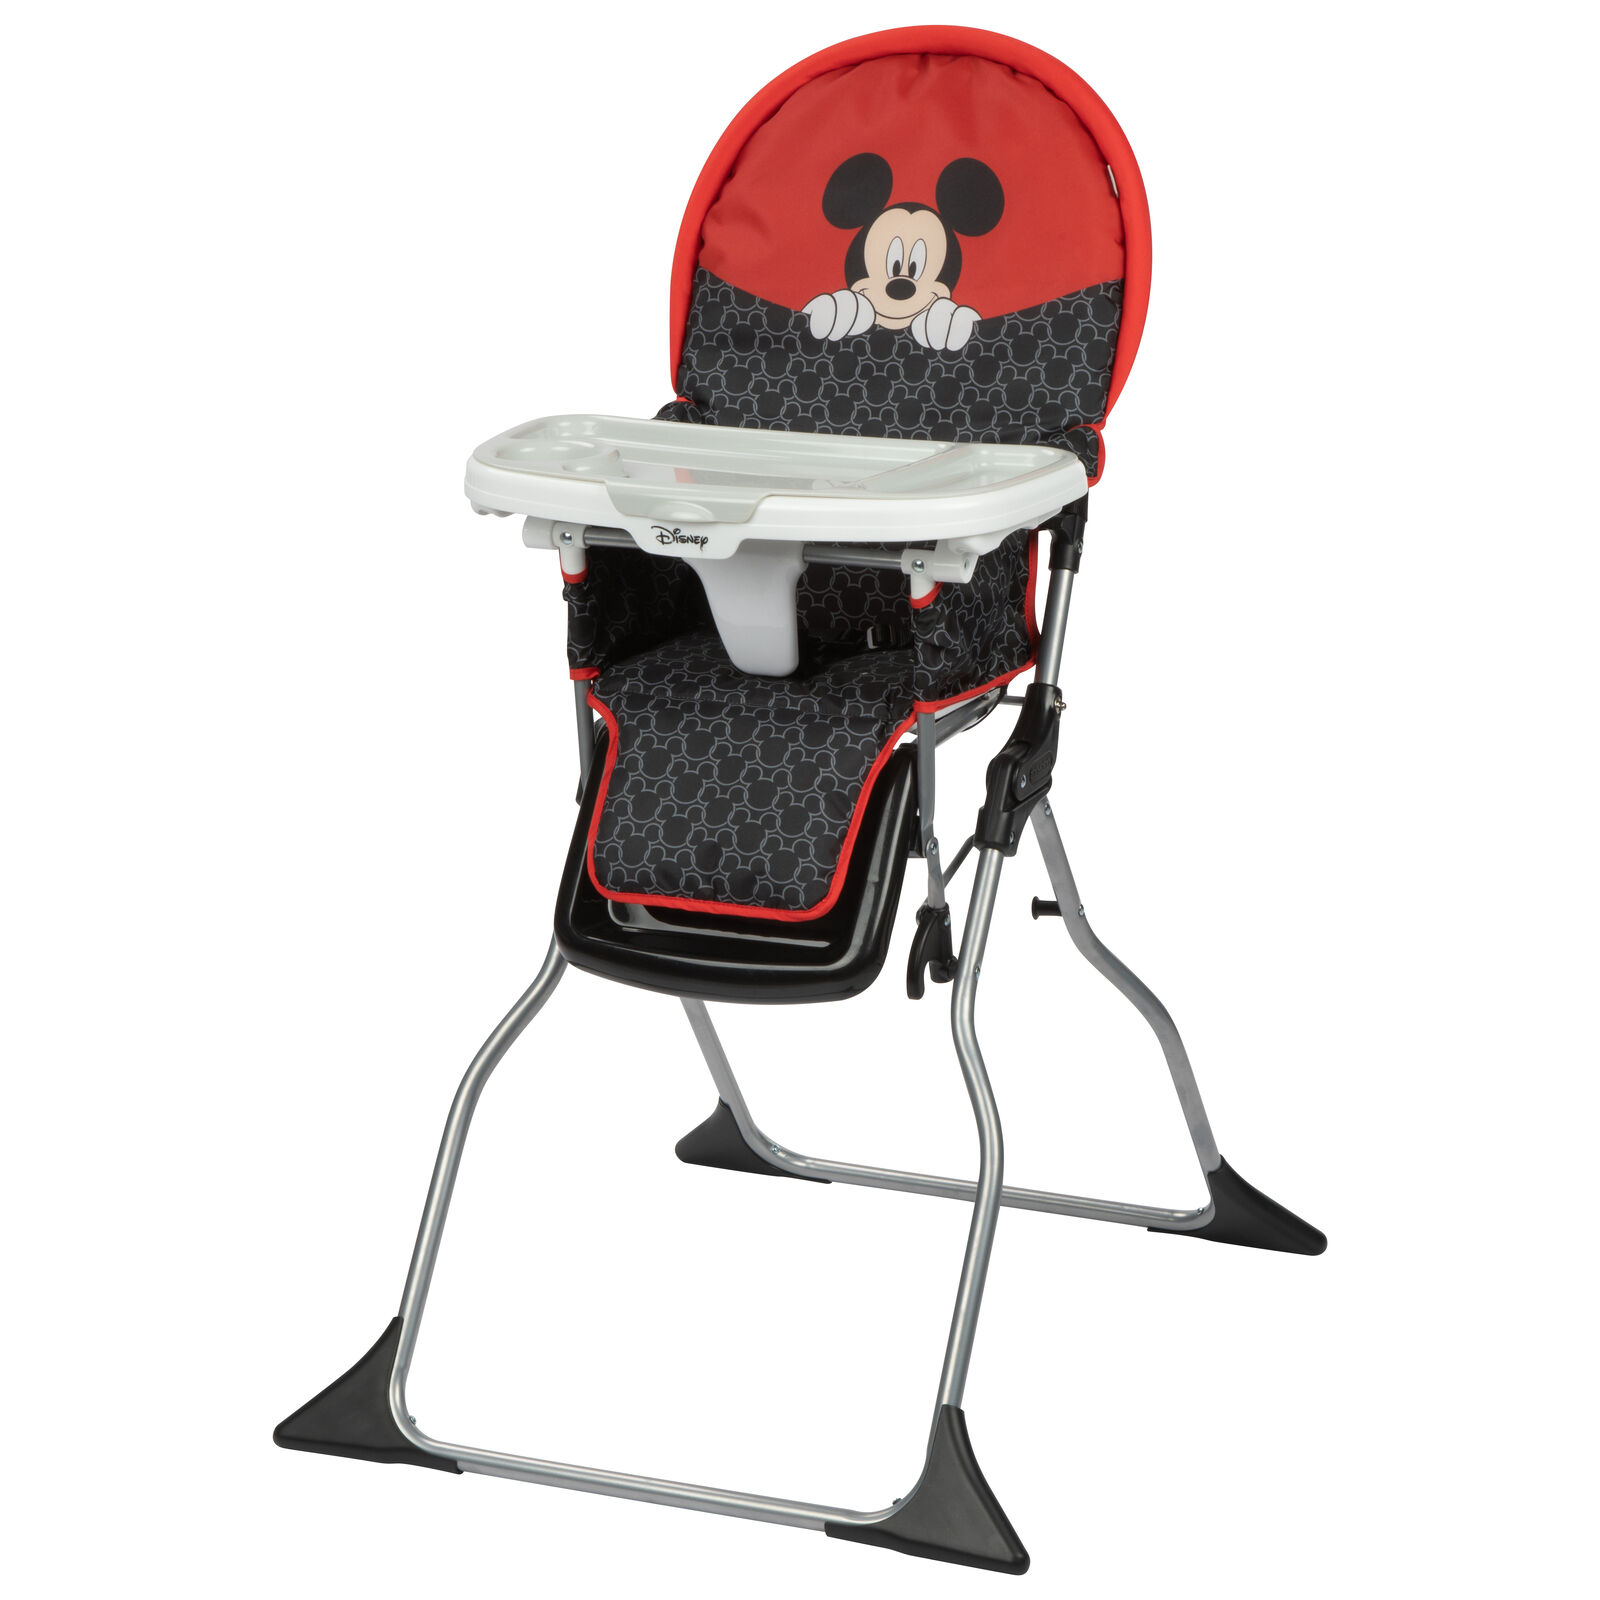 Disney Baby 3D High Chair with Mickey